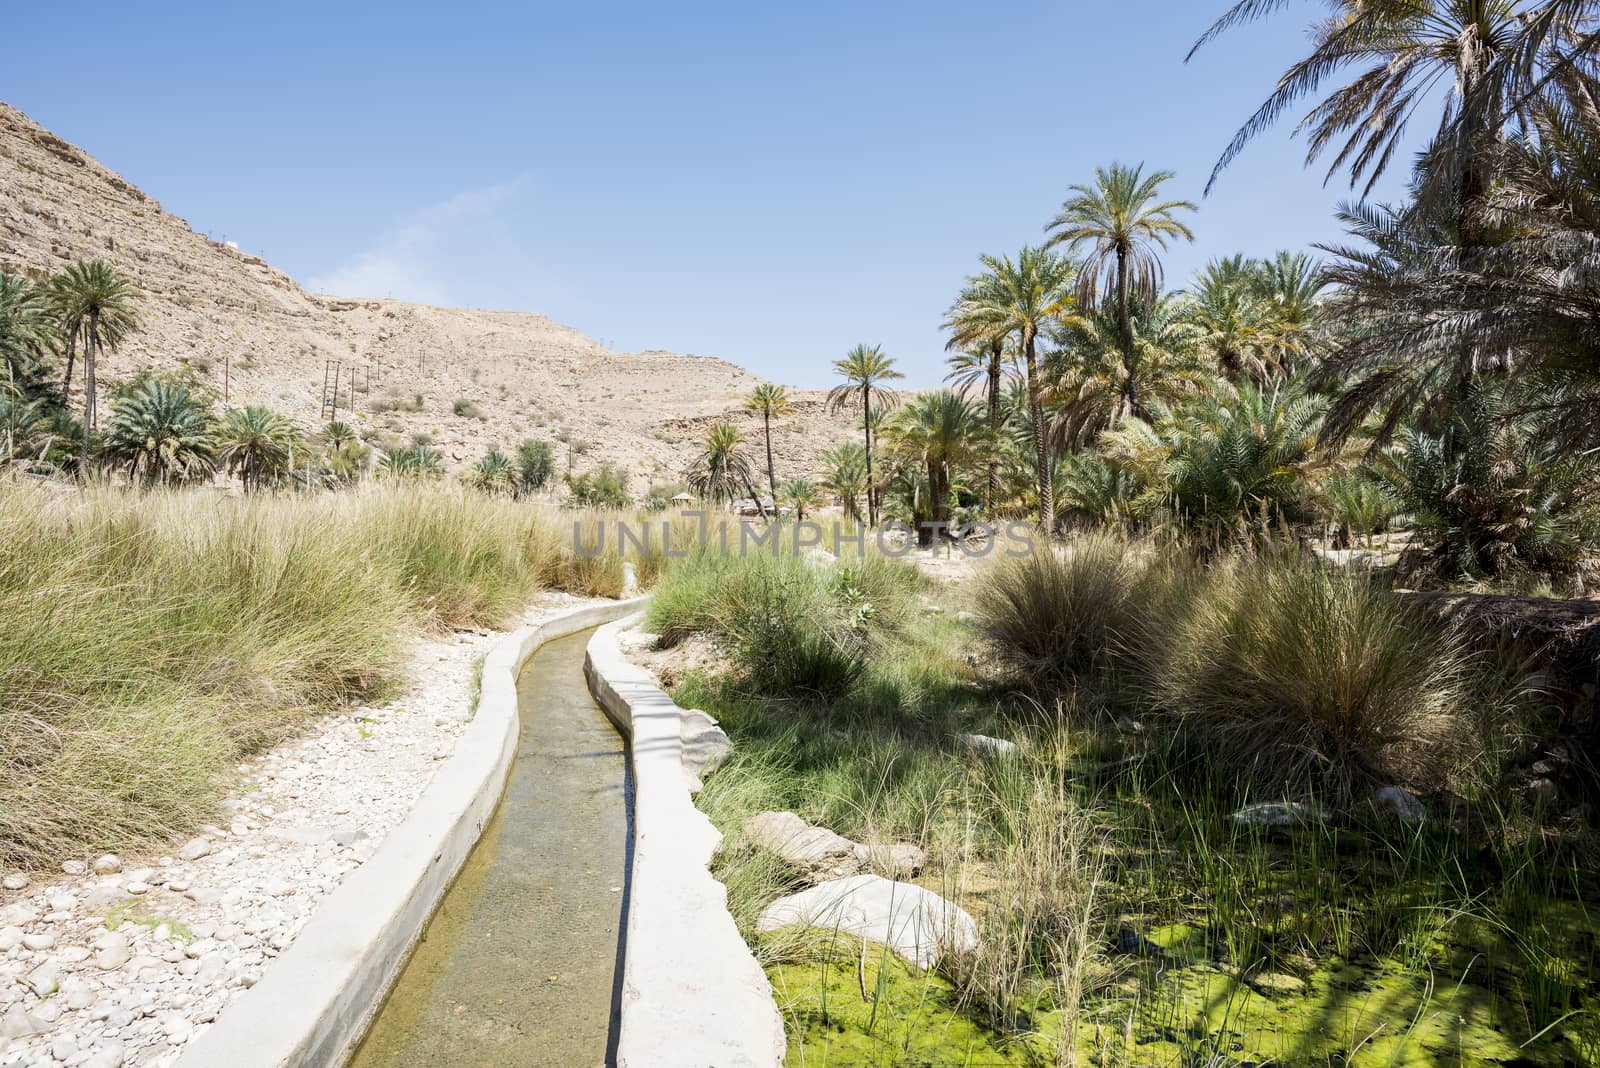 Water canal coming from a river and passing thru a garden and palm trees farm. Wadi Bani Khalid, Sultanate of Oman